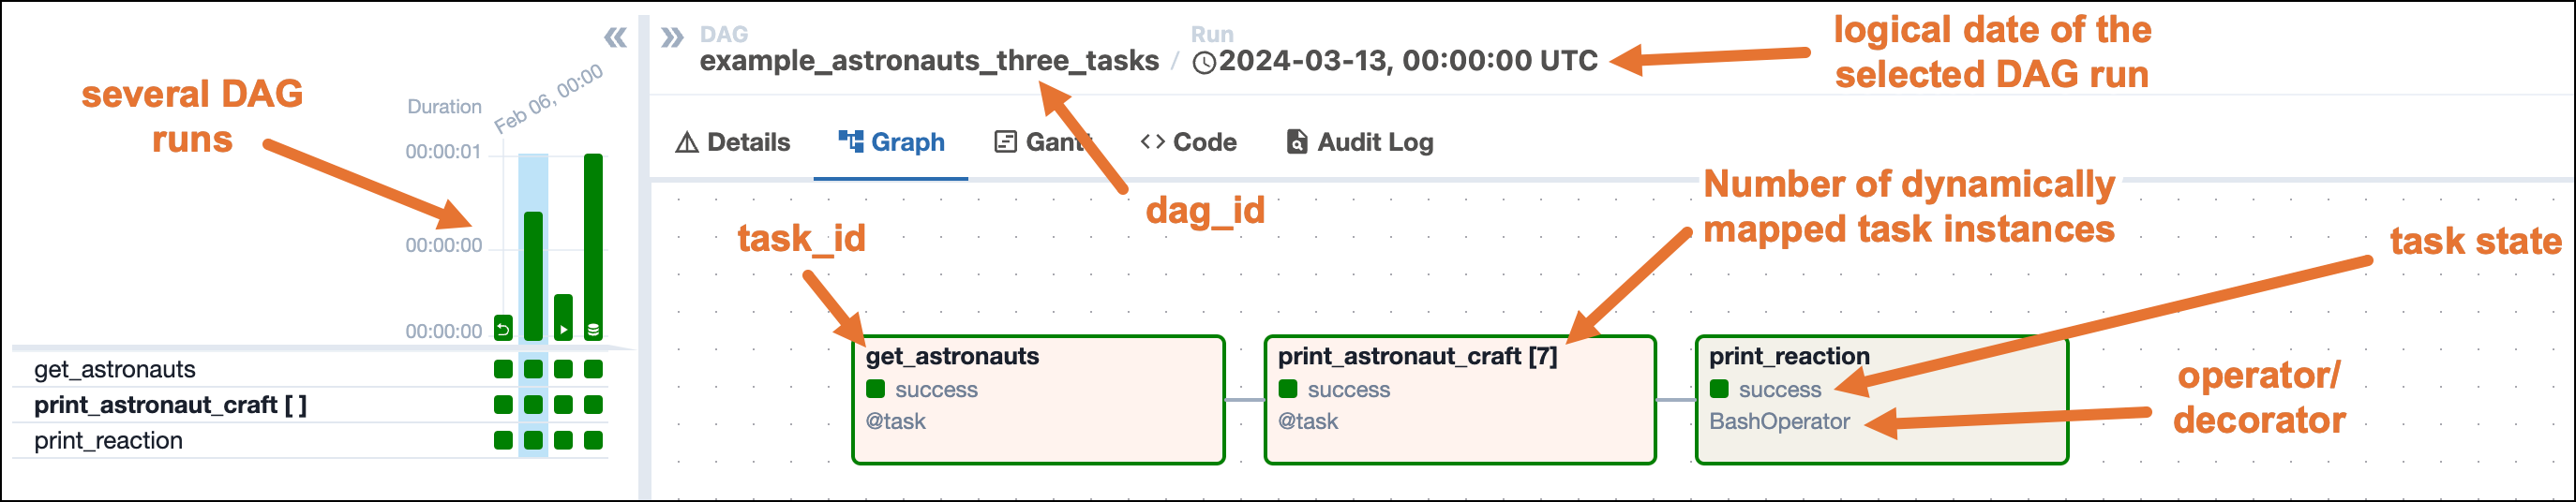 Screenshot of the Airflow UI showing the Grid view with the Graph tab selected. A DAG run with 3 tasks is shown. The annotations show the location of the dag_id and logical date (top of the screenshot), the task_id, task state and operator/decorator used in the nodes of the graph, as well as the number of dynamically mapped task instances in [] behind the task id and the DAG dependency layout to the right of the screen.